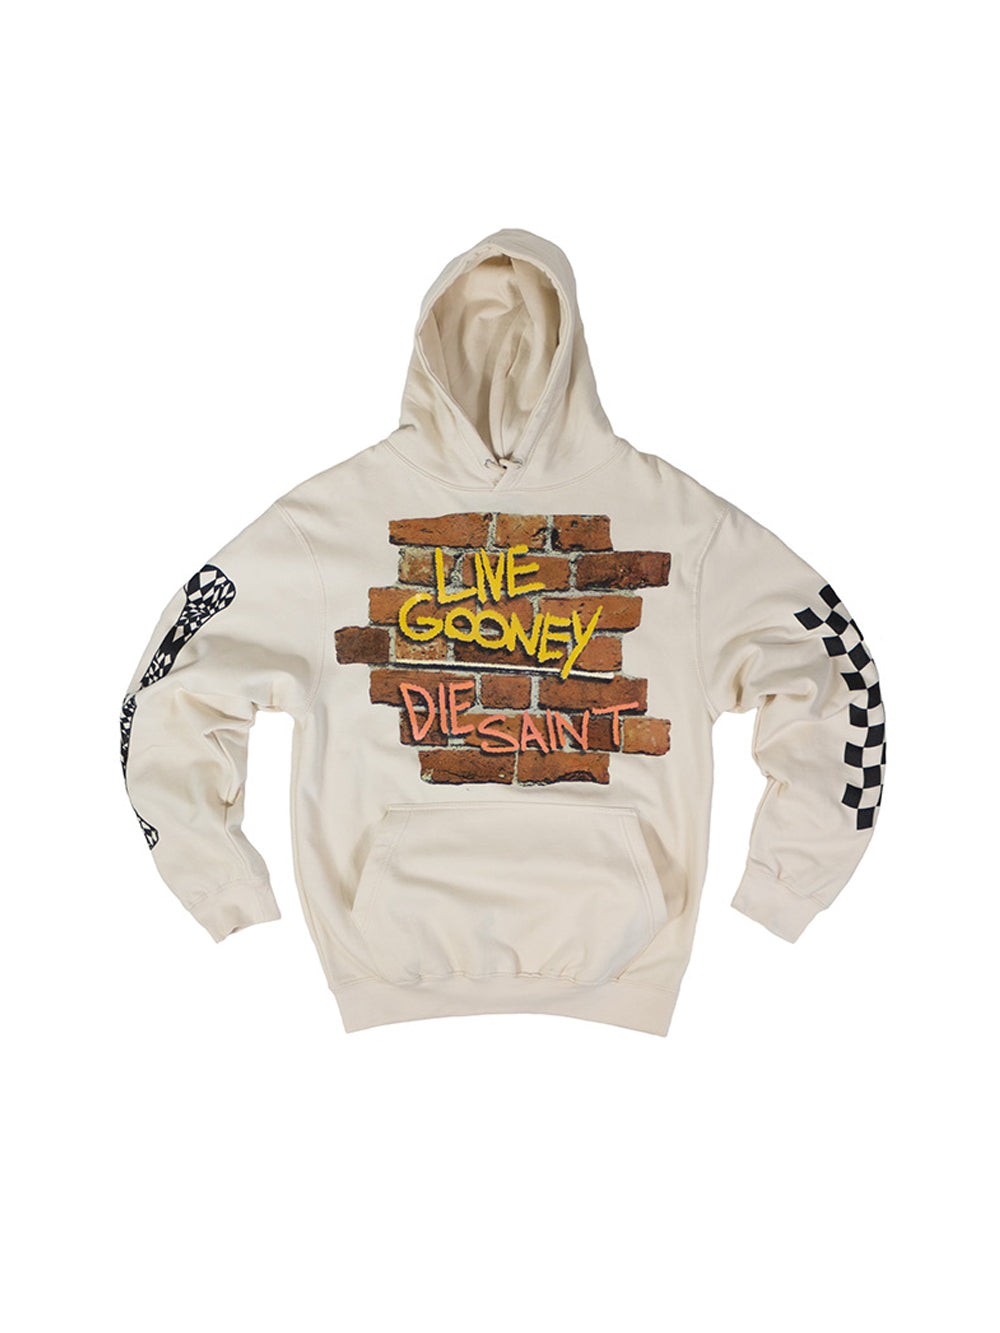 OF THE WALL HOODIE.